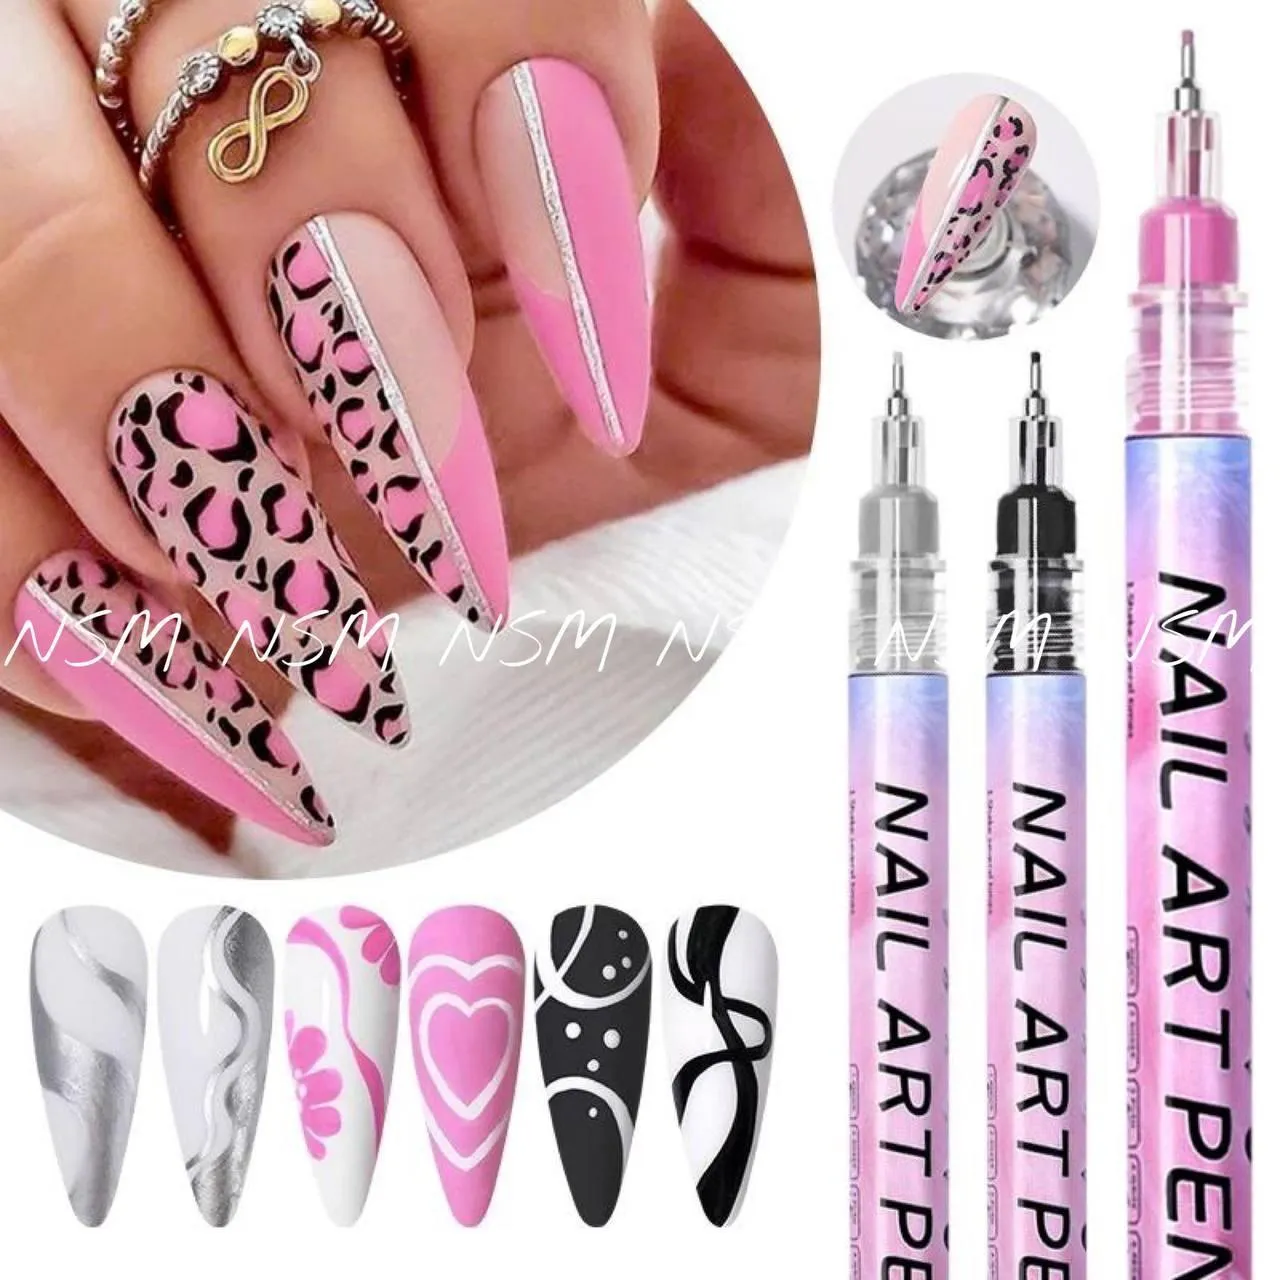 Simply Spoiled Beauty Products Nail Art Pens Review & Demo 